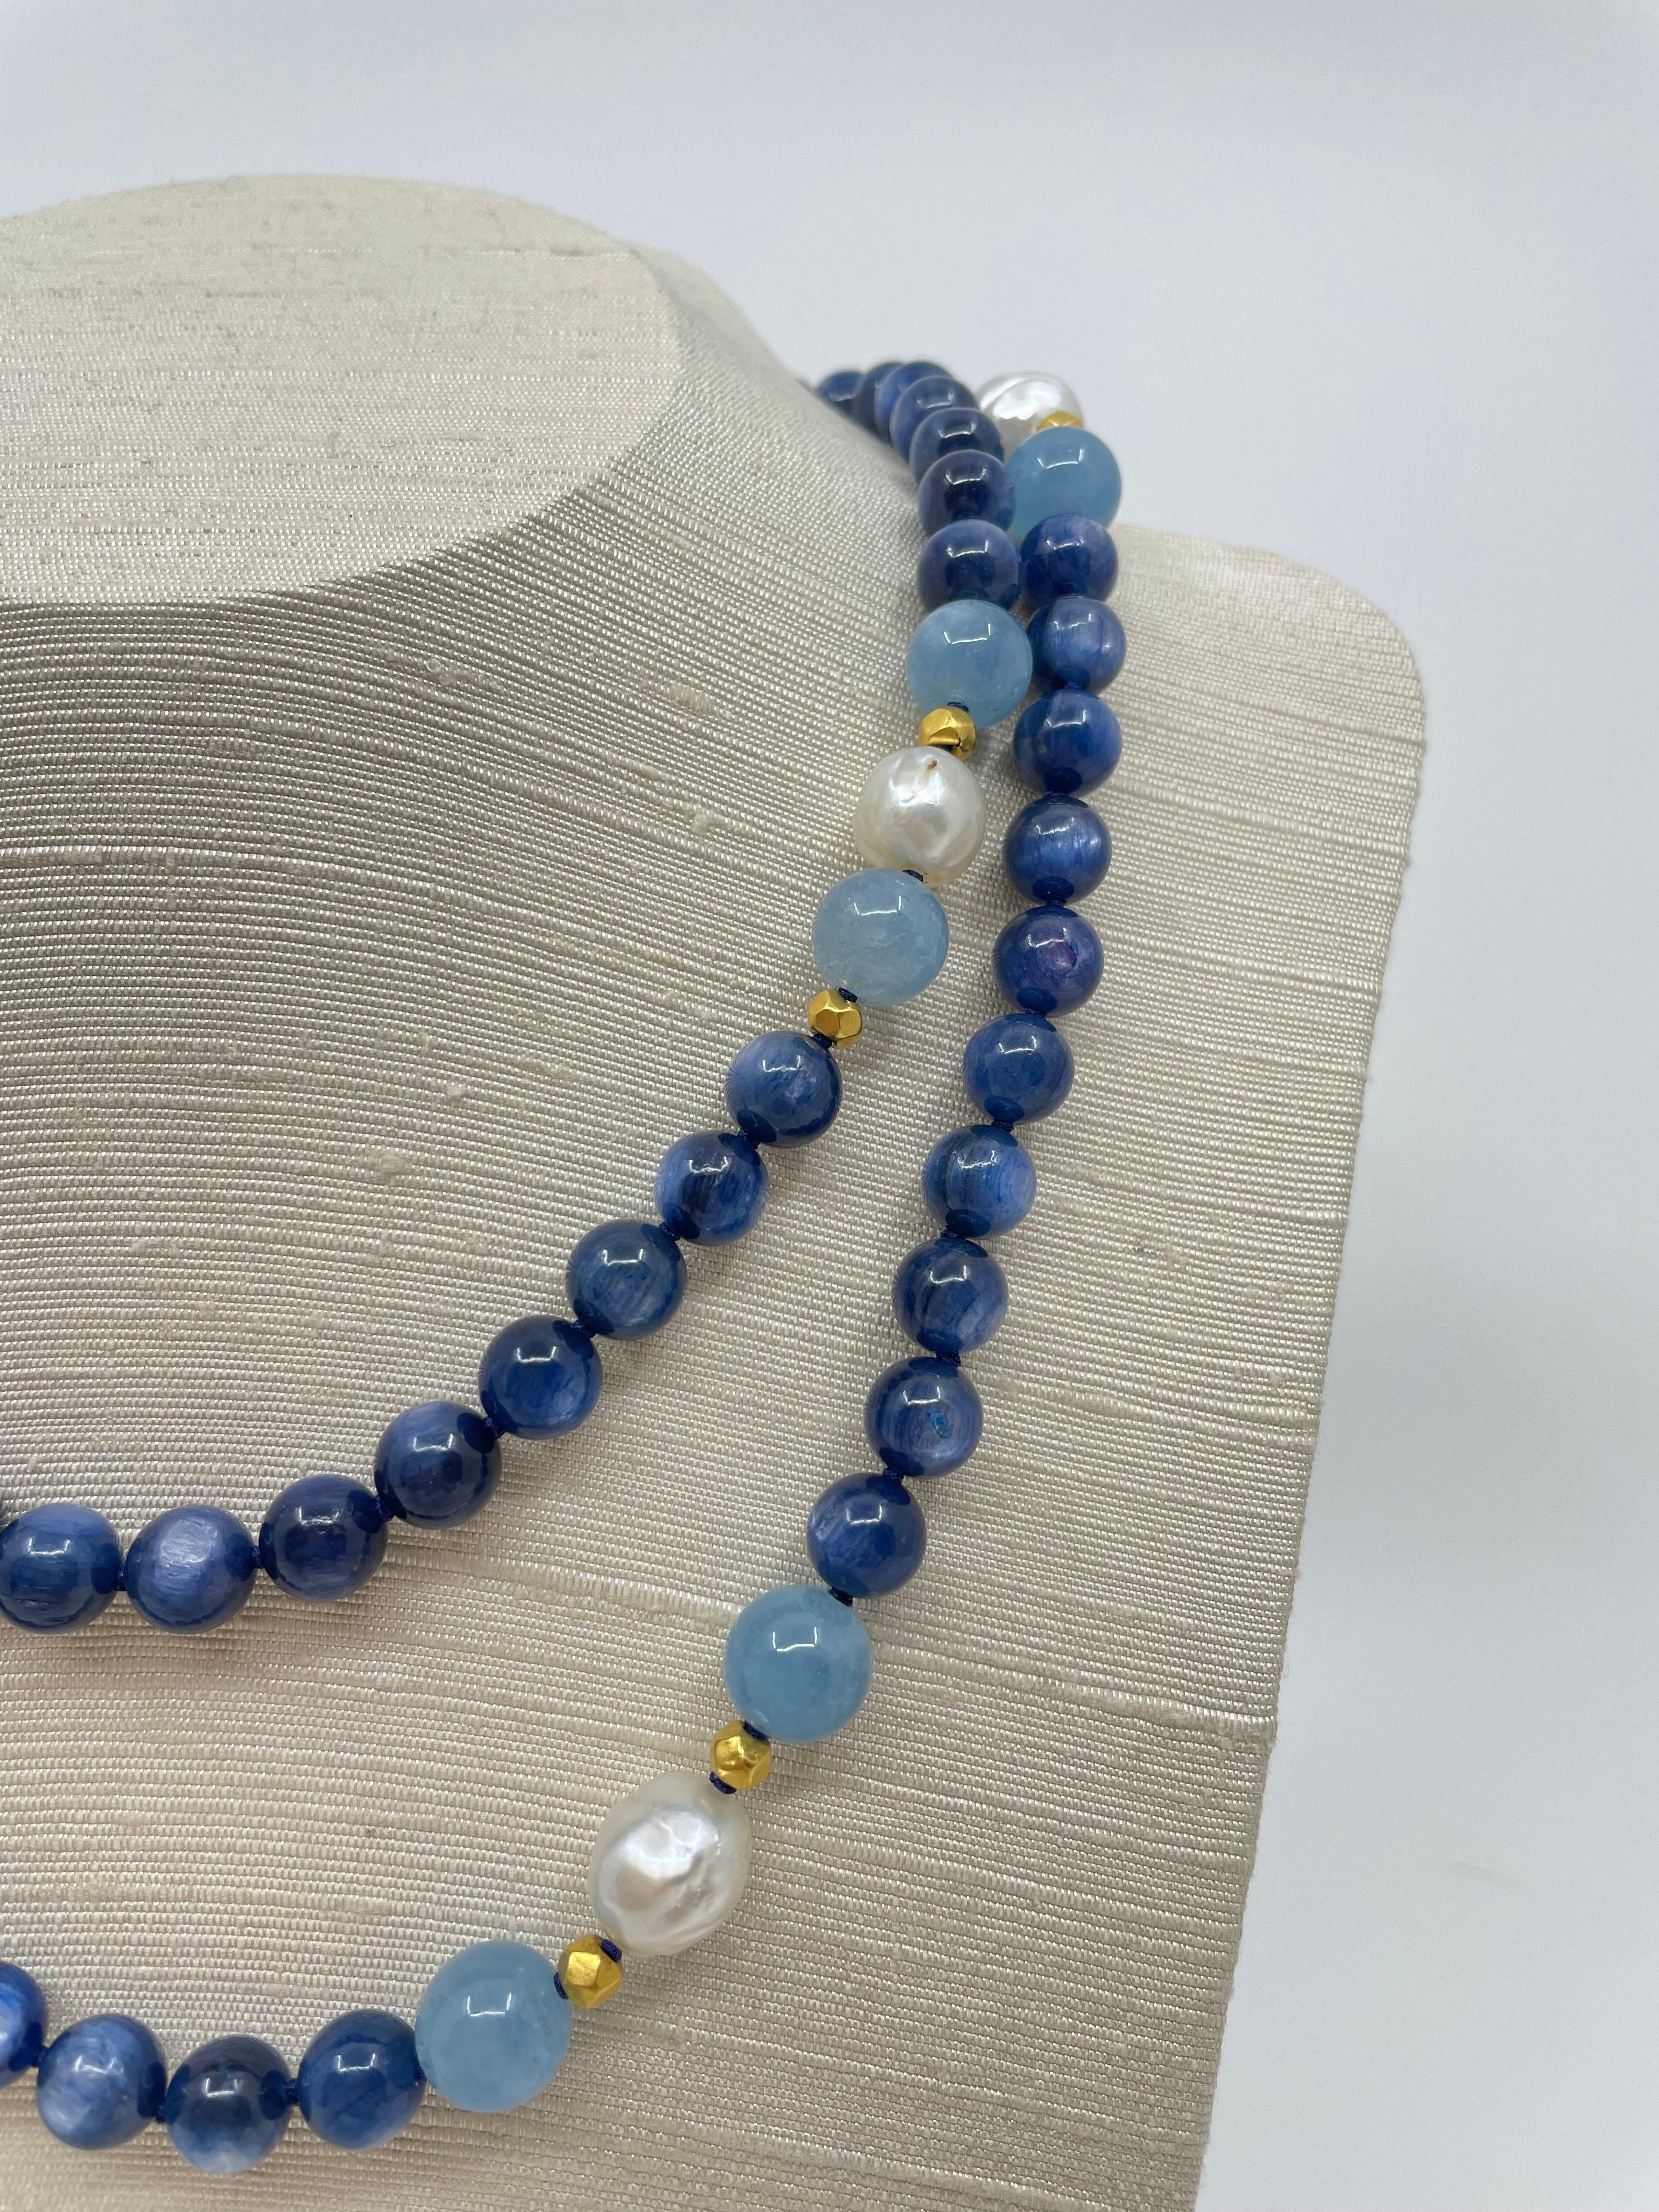 Long Necklace with Kyanite, Aquamarine, South Sea Pearls & 18K Solid Gold Beads For Sale 6